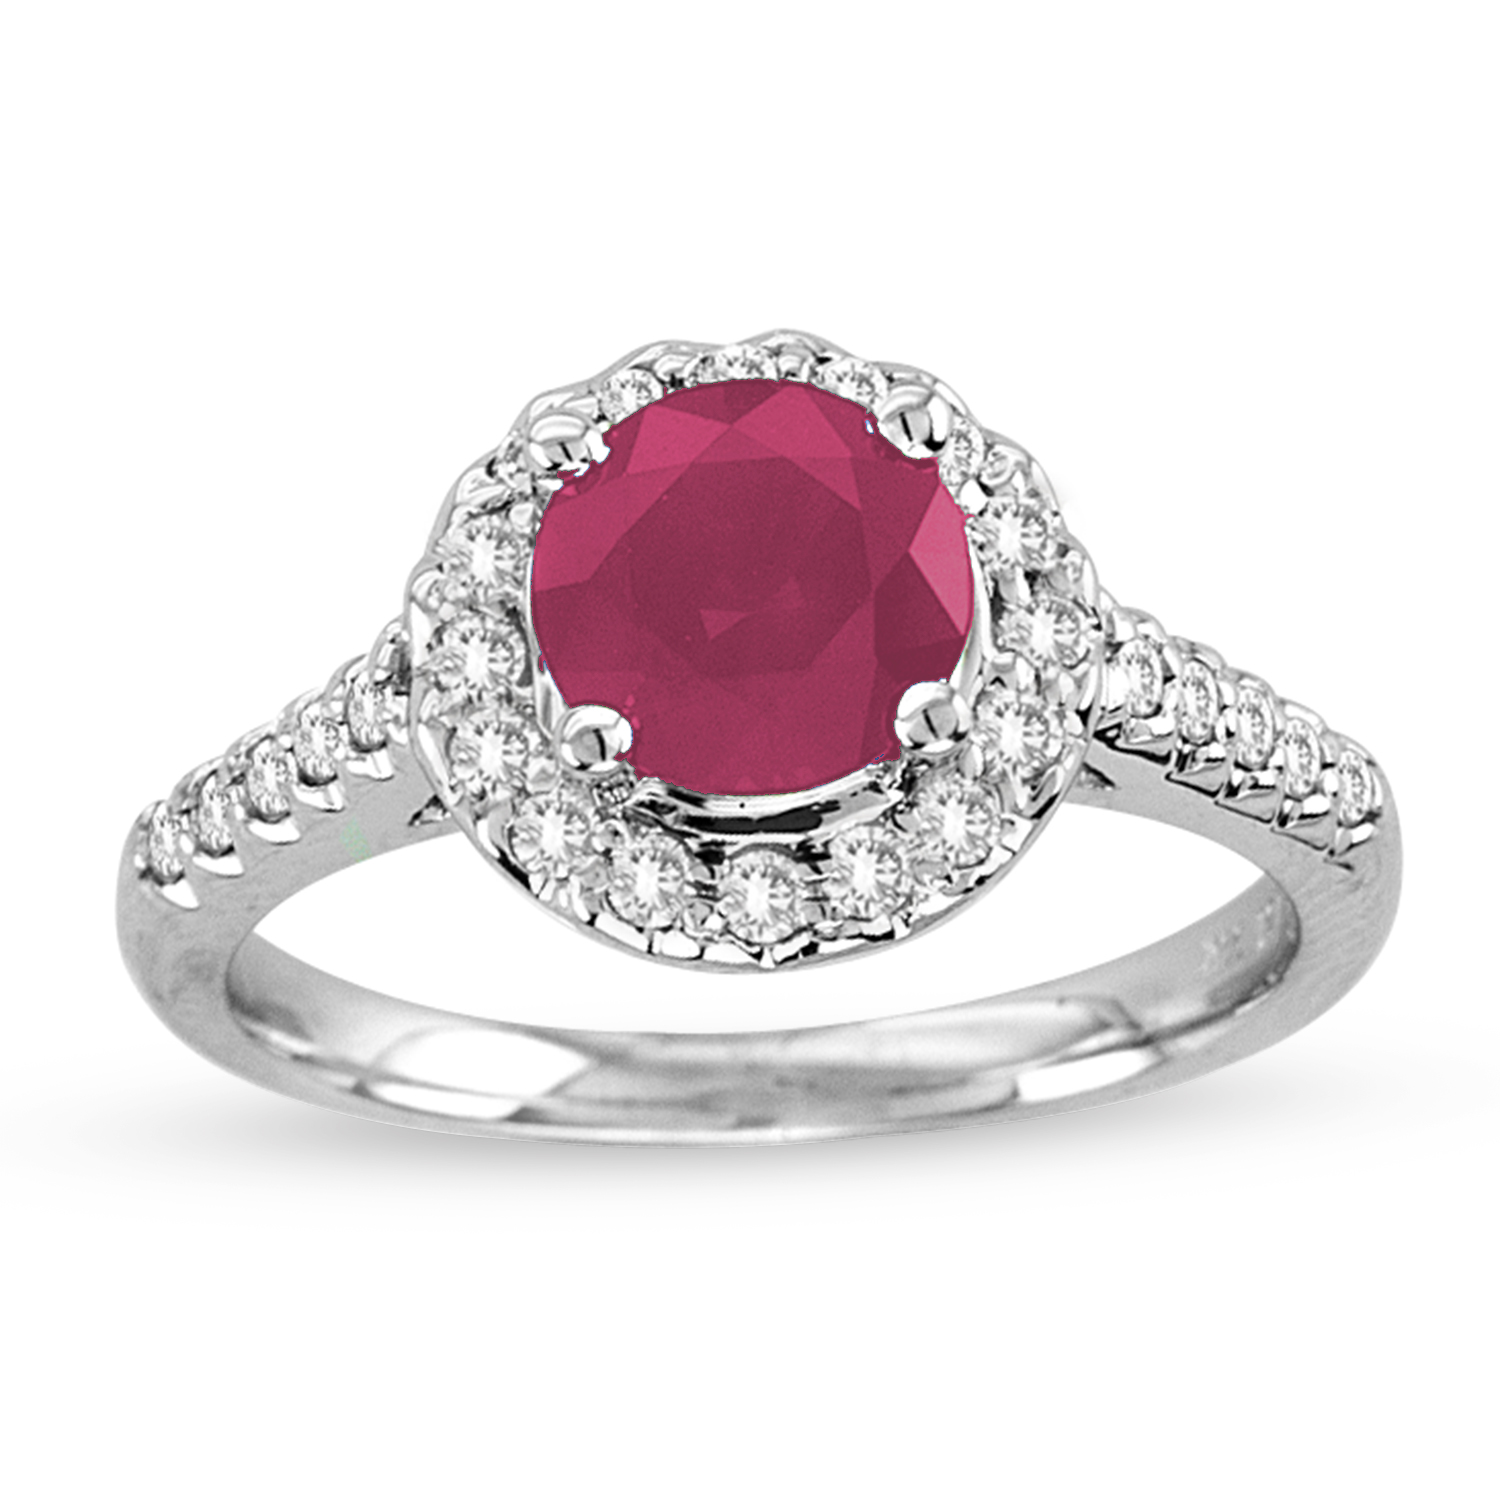 View 14k White Gold Ring With 1.31ct Round Gem Quality Ruby in Center and 0.30ct tw Round Diamonds 